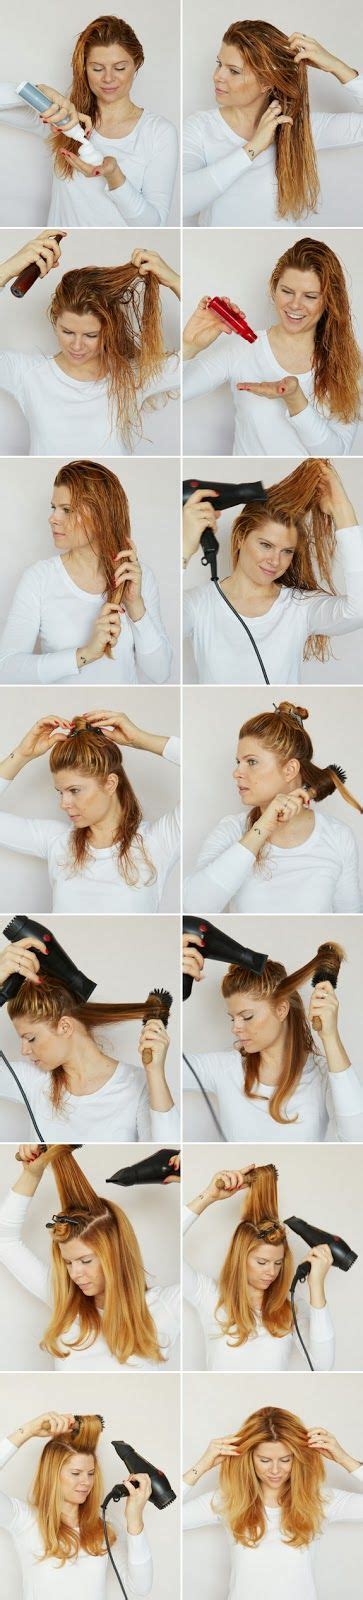 Pocket How To Blow Dry Your Hair Like A Hair Stylist Good Hair Day